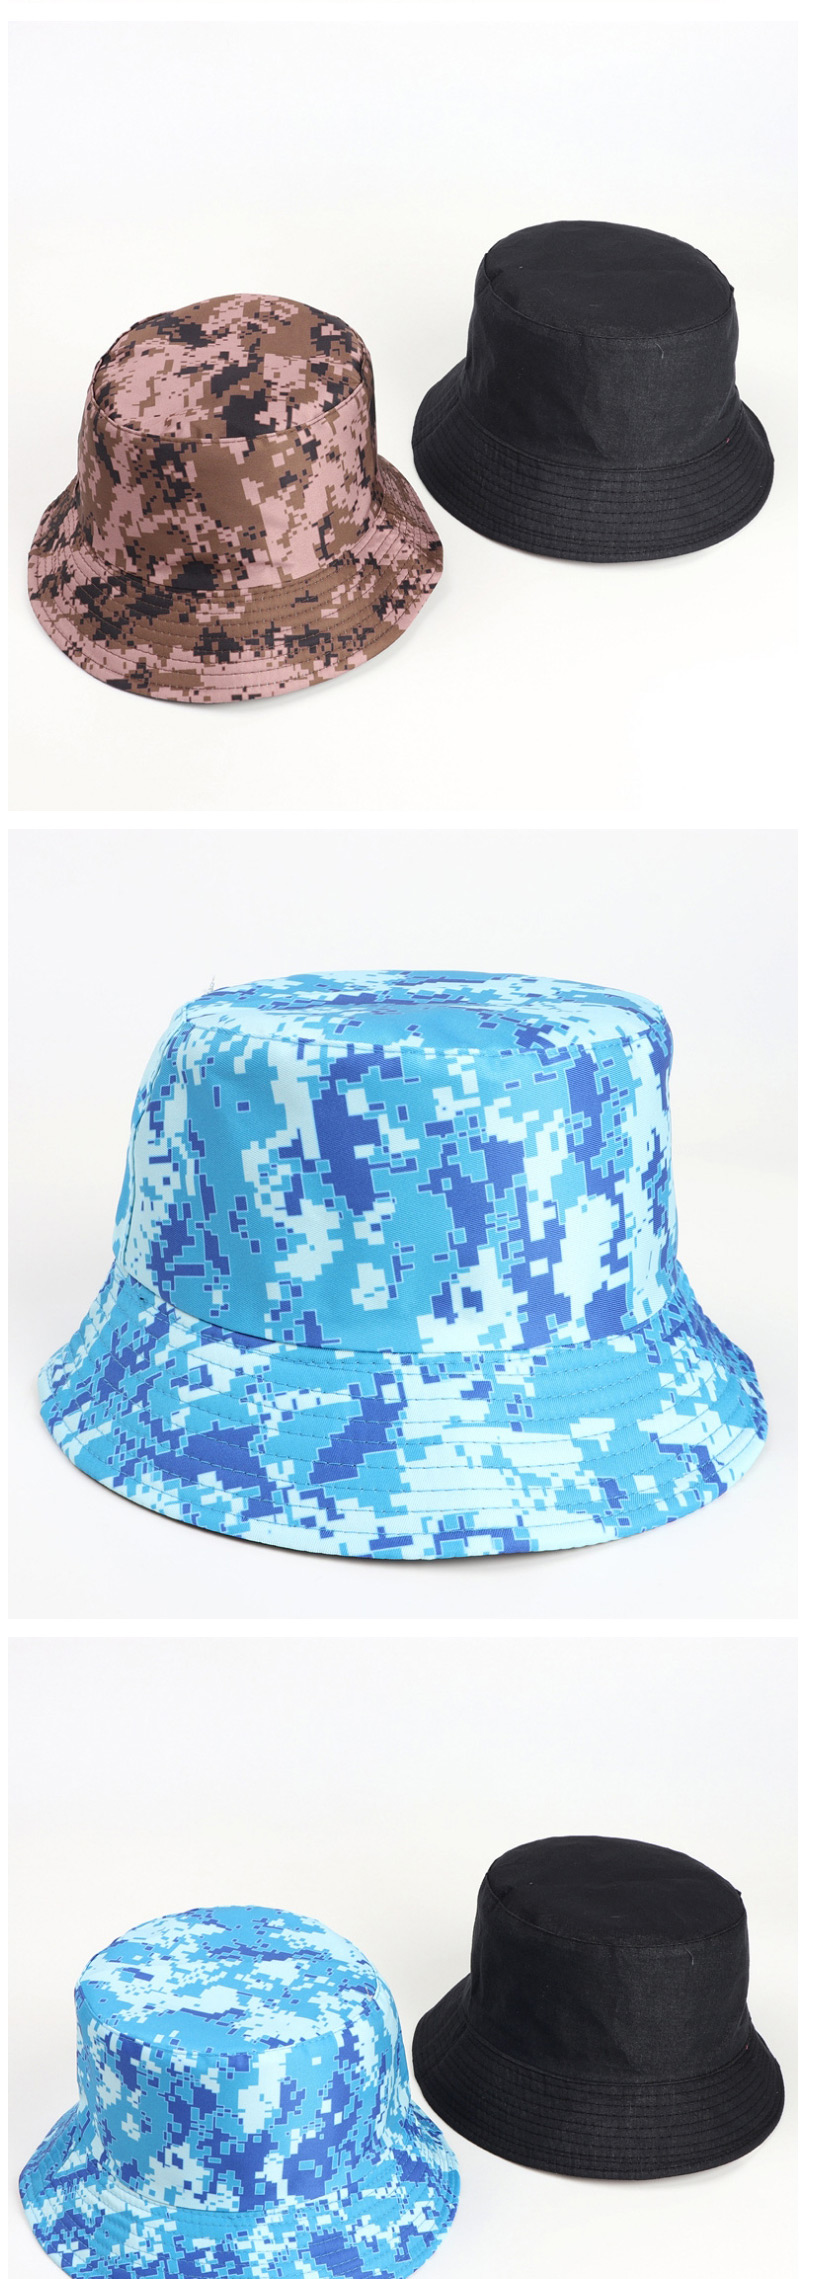 Fashion Gray Printed Double-sided Multicolor Camouflage Fisherman Hat,Sun Hats